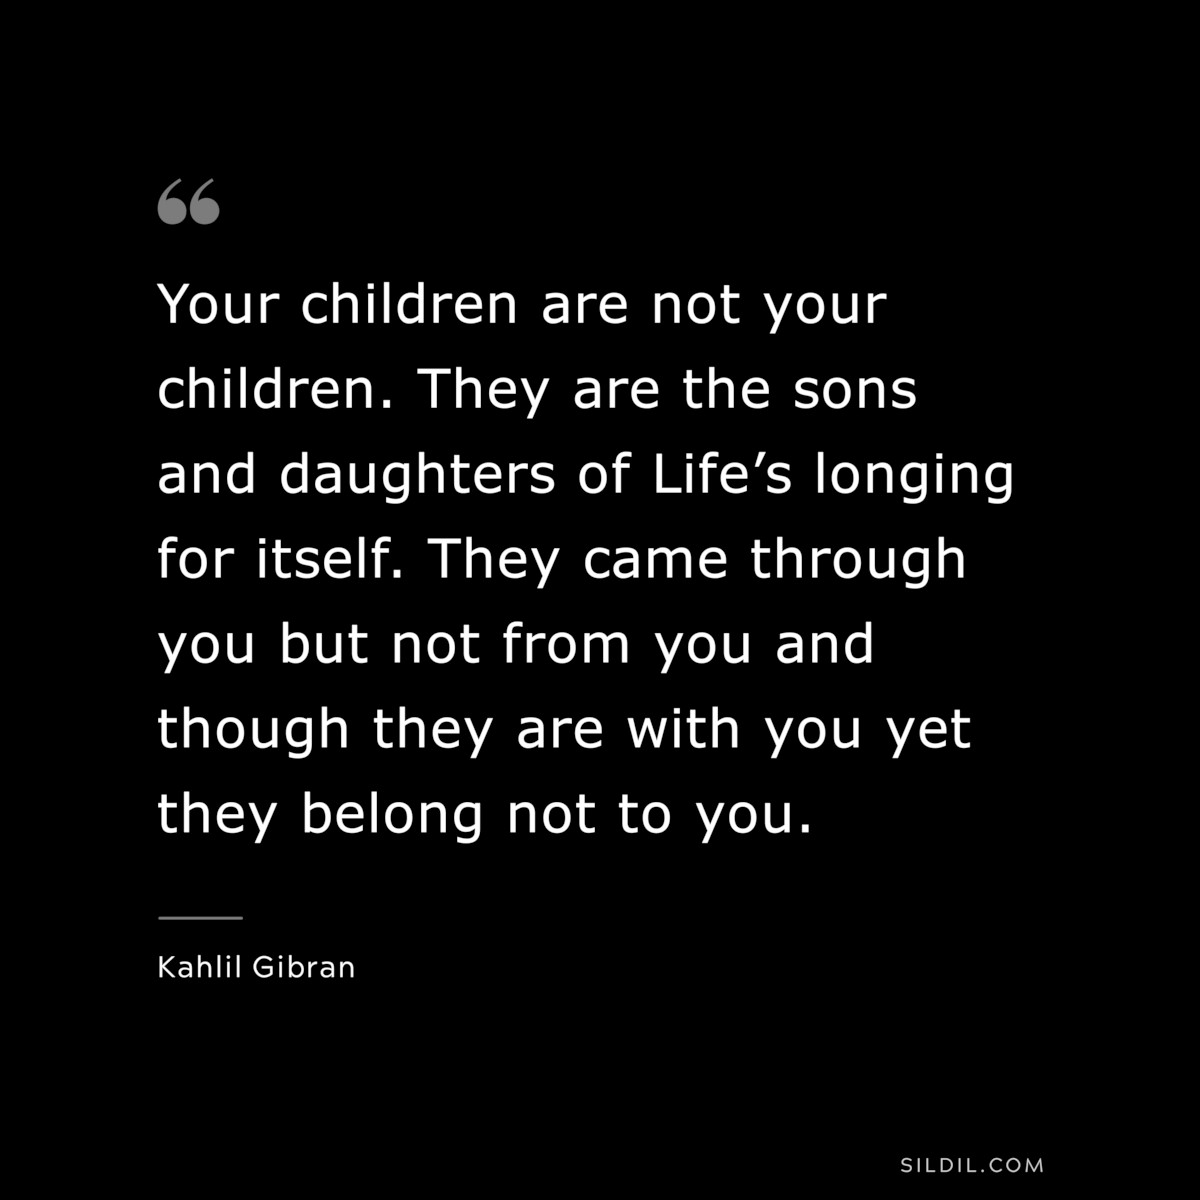 Your children are not your children. They are the sons and daughters of Life’s longing for itself. They came through you but not from you and though they are with you yet they belong not to you. ― Kahlil Gibran